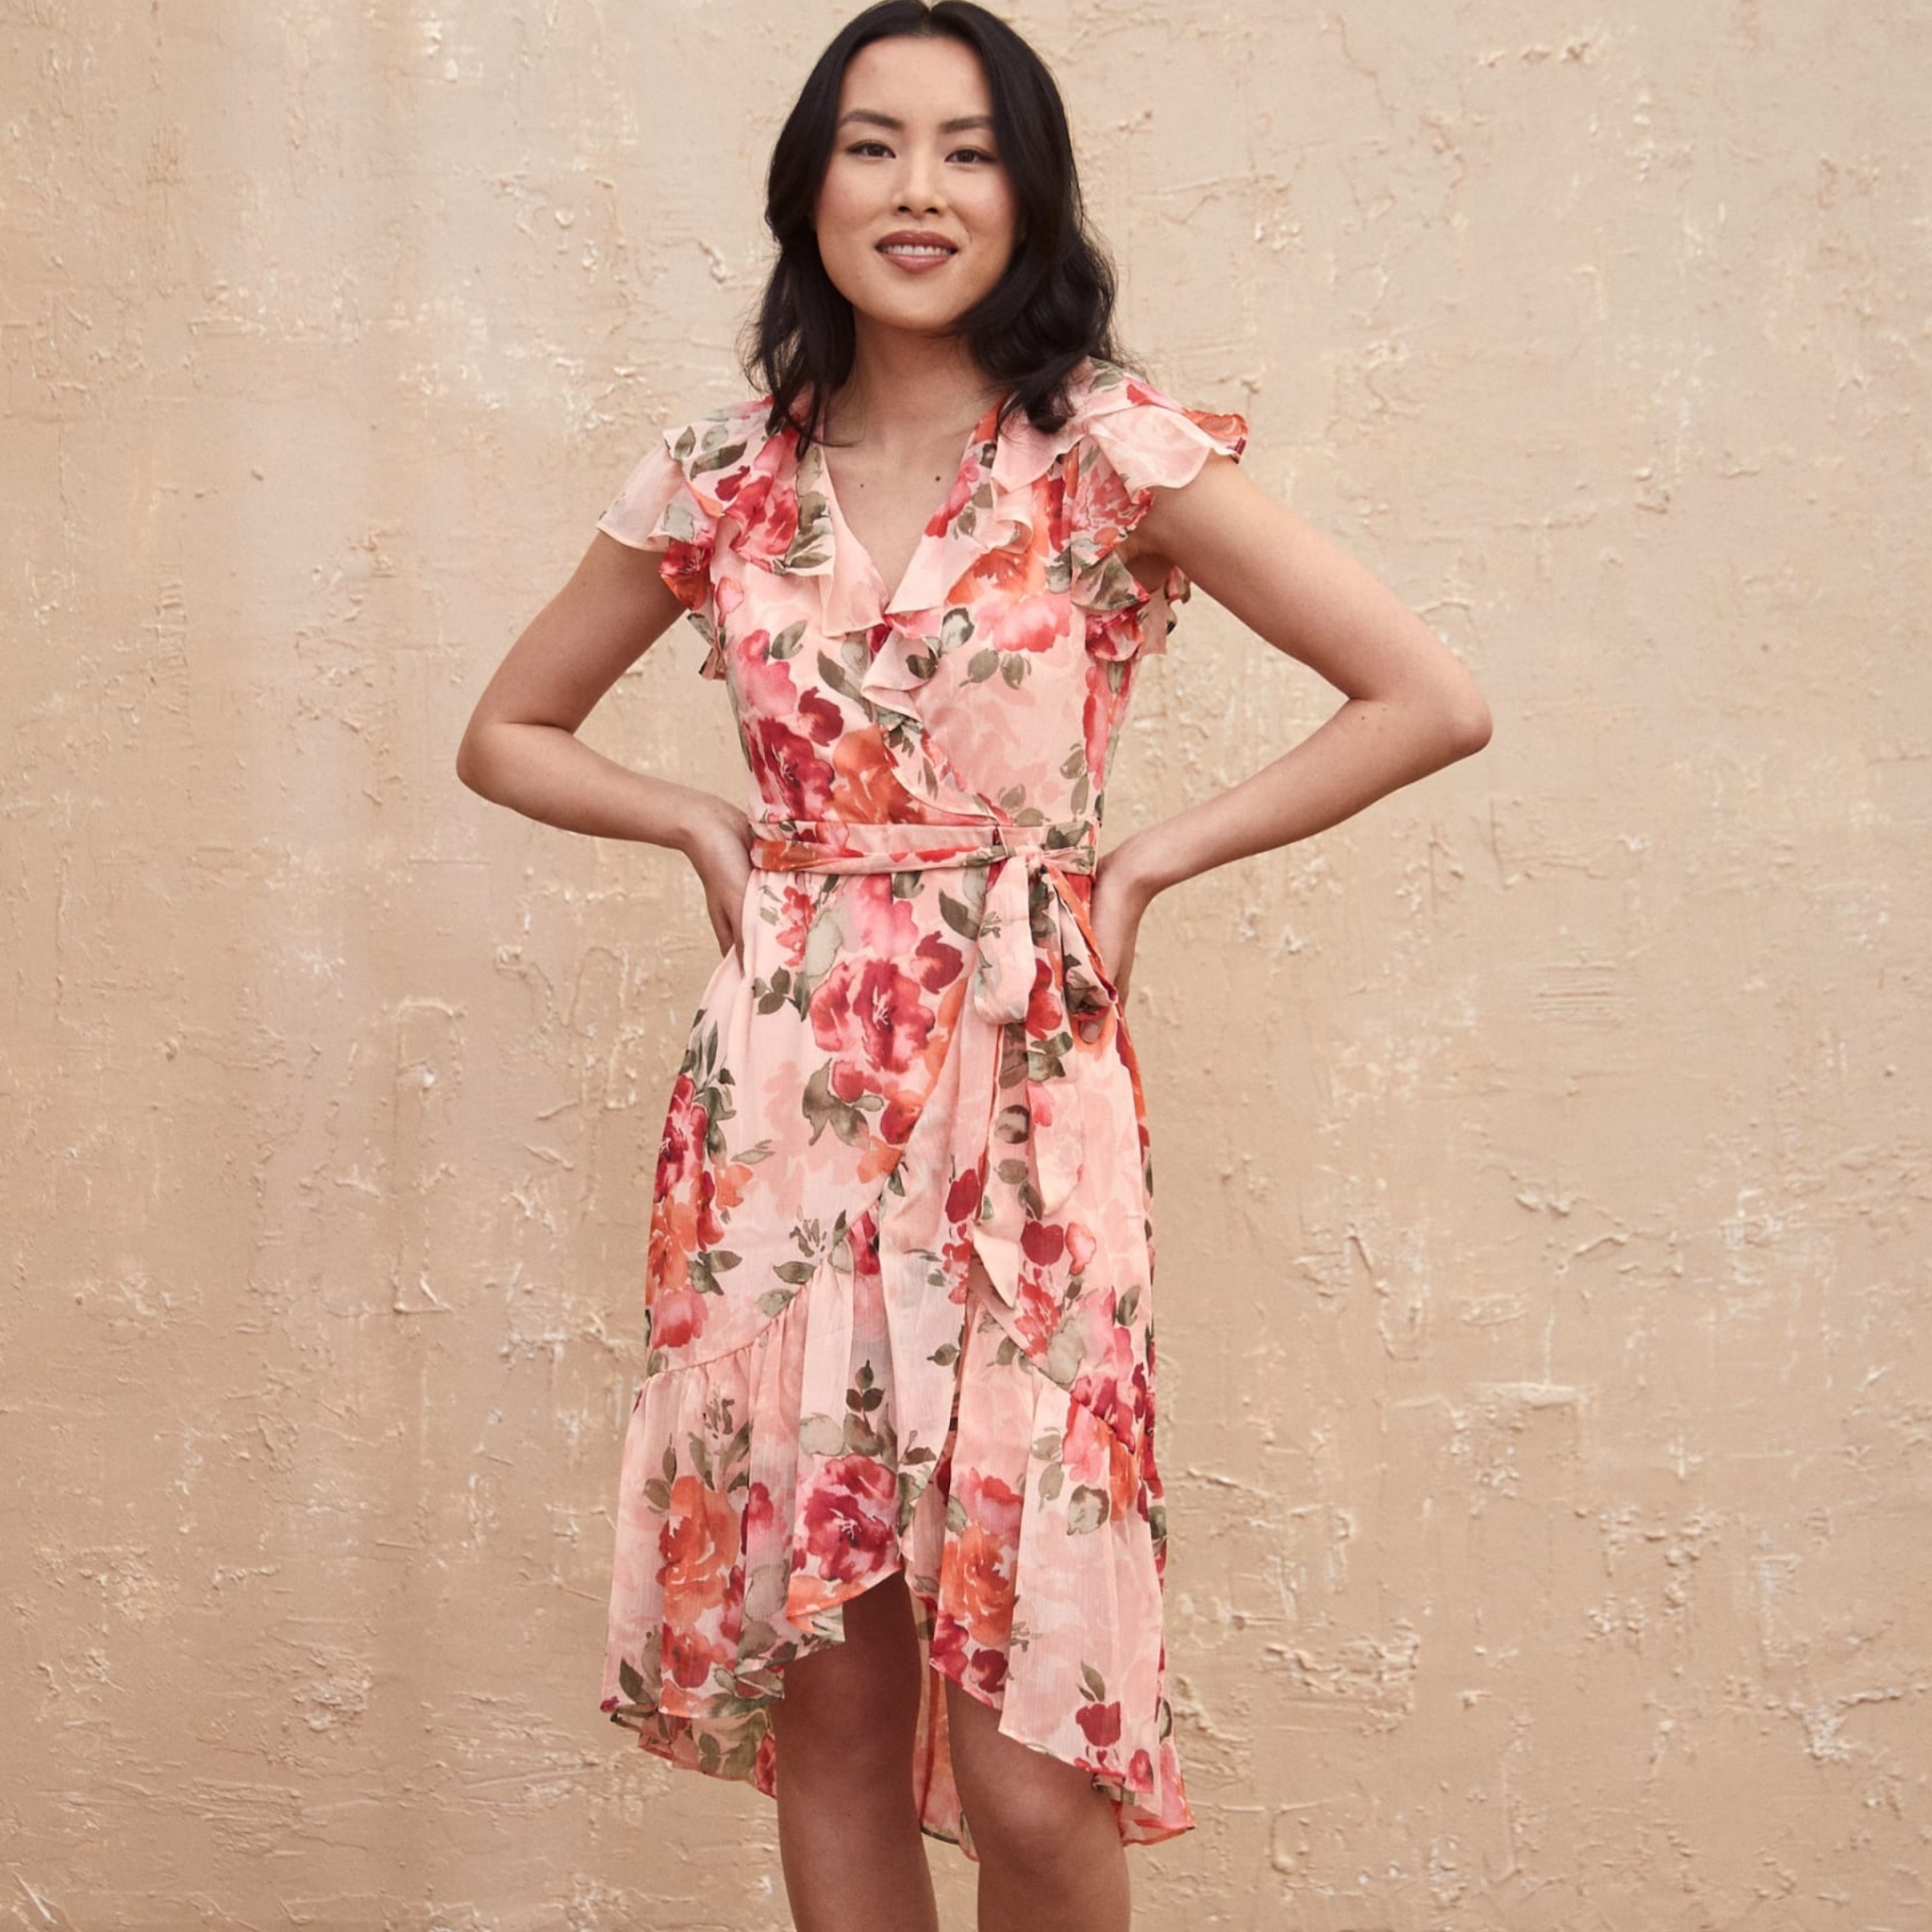 A dark haired woman is wearing a floral, light pink dress from Laura.